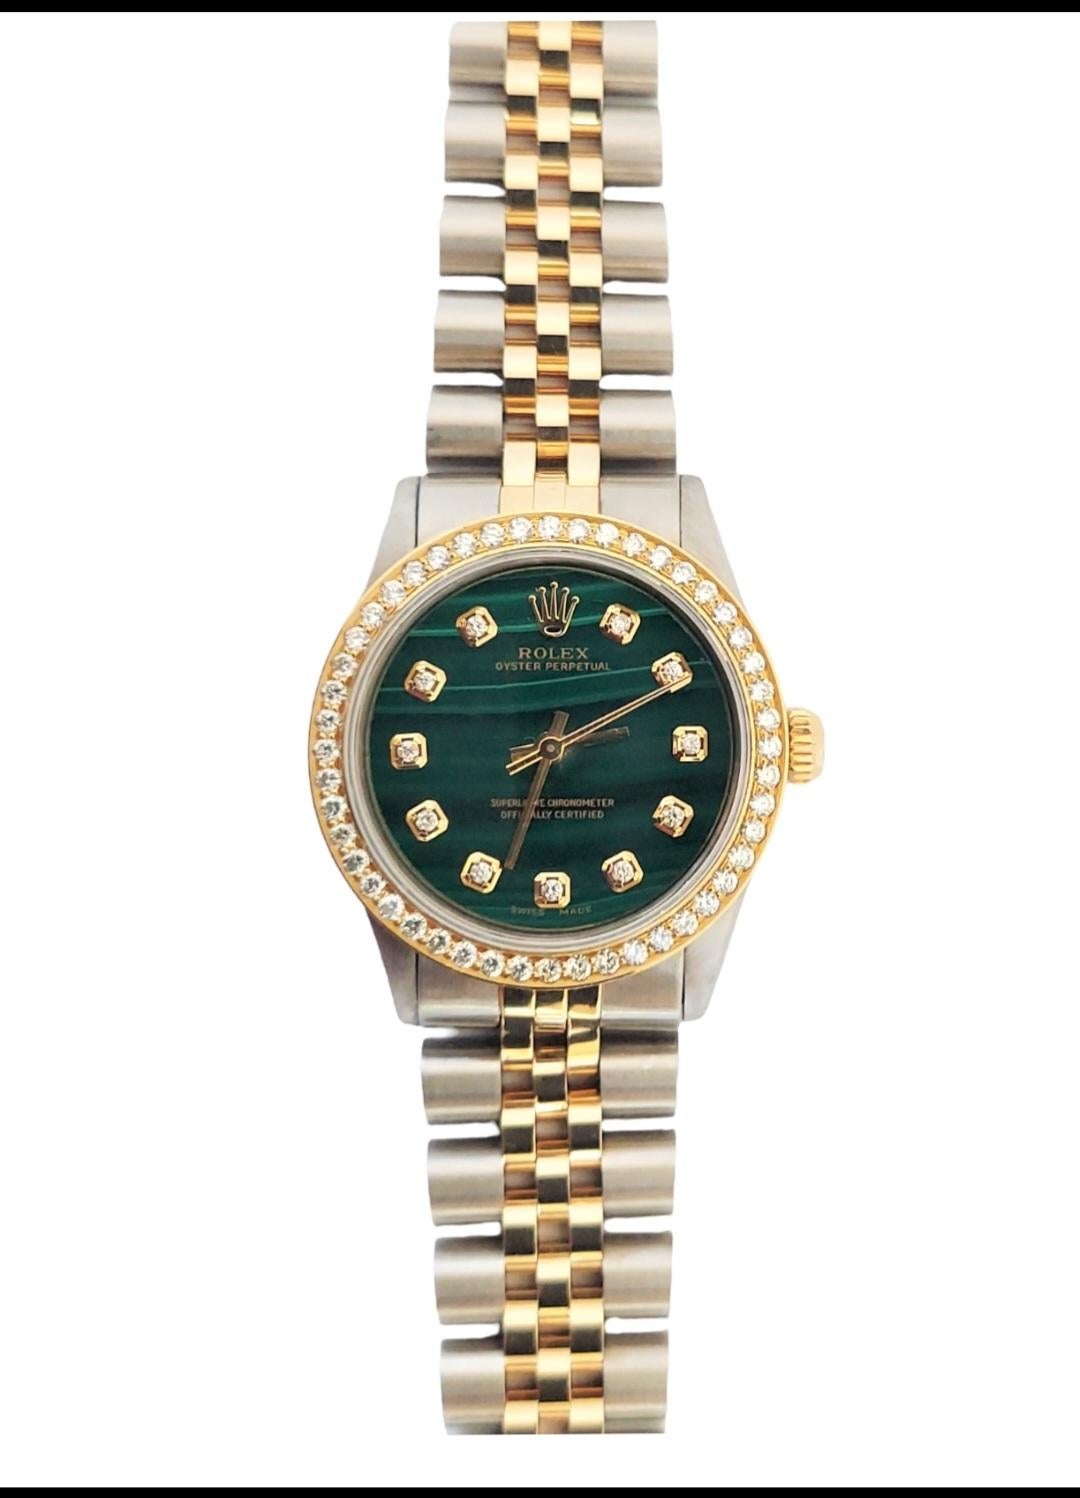 (Watch Description)
Brand - Rolex
Gender - Ladies
Model - 6551 Perpetual /No Date
Metals - Stainless steel 
Case size - 31mm
Bezel -Steel Plated Yellow Gold Diamond
Crystal - Sapphire
Movement - Automatic caliber 1161
Dial - Refinished Green